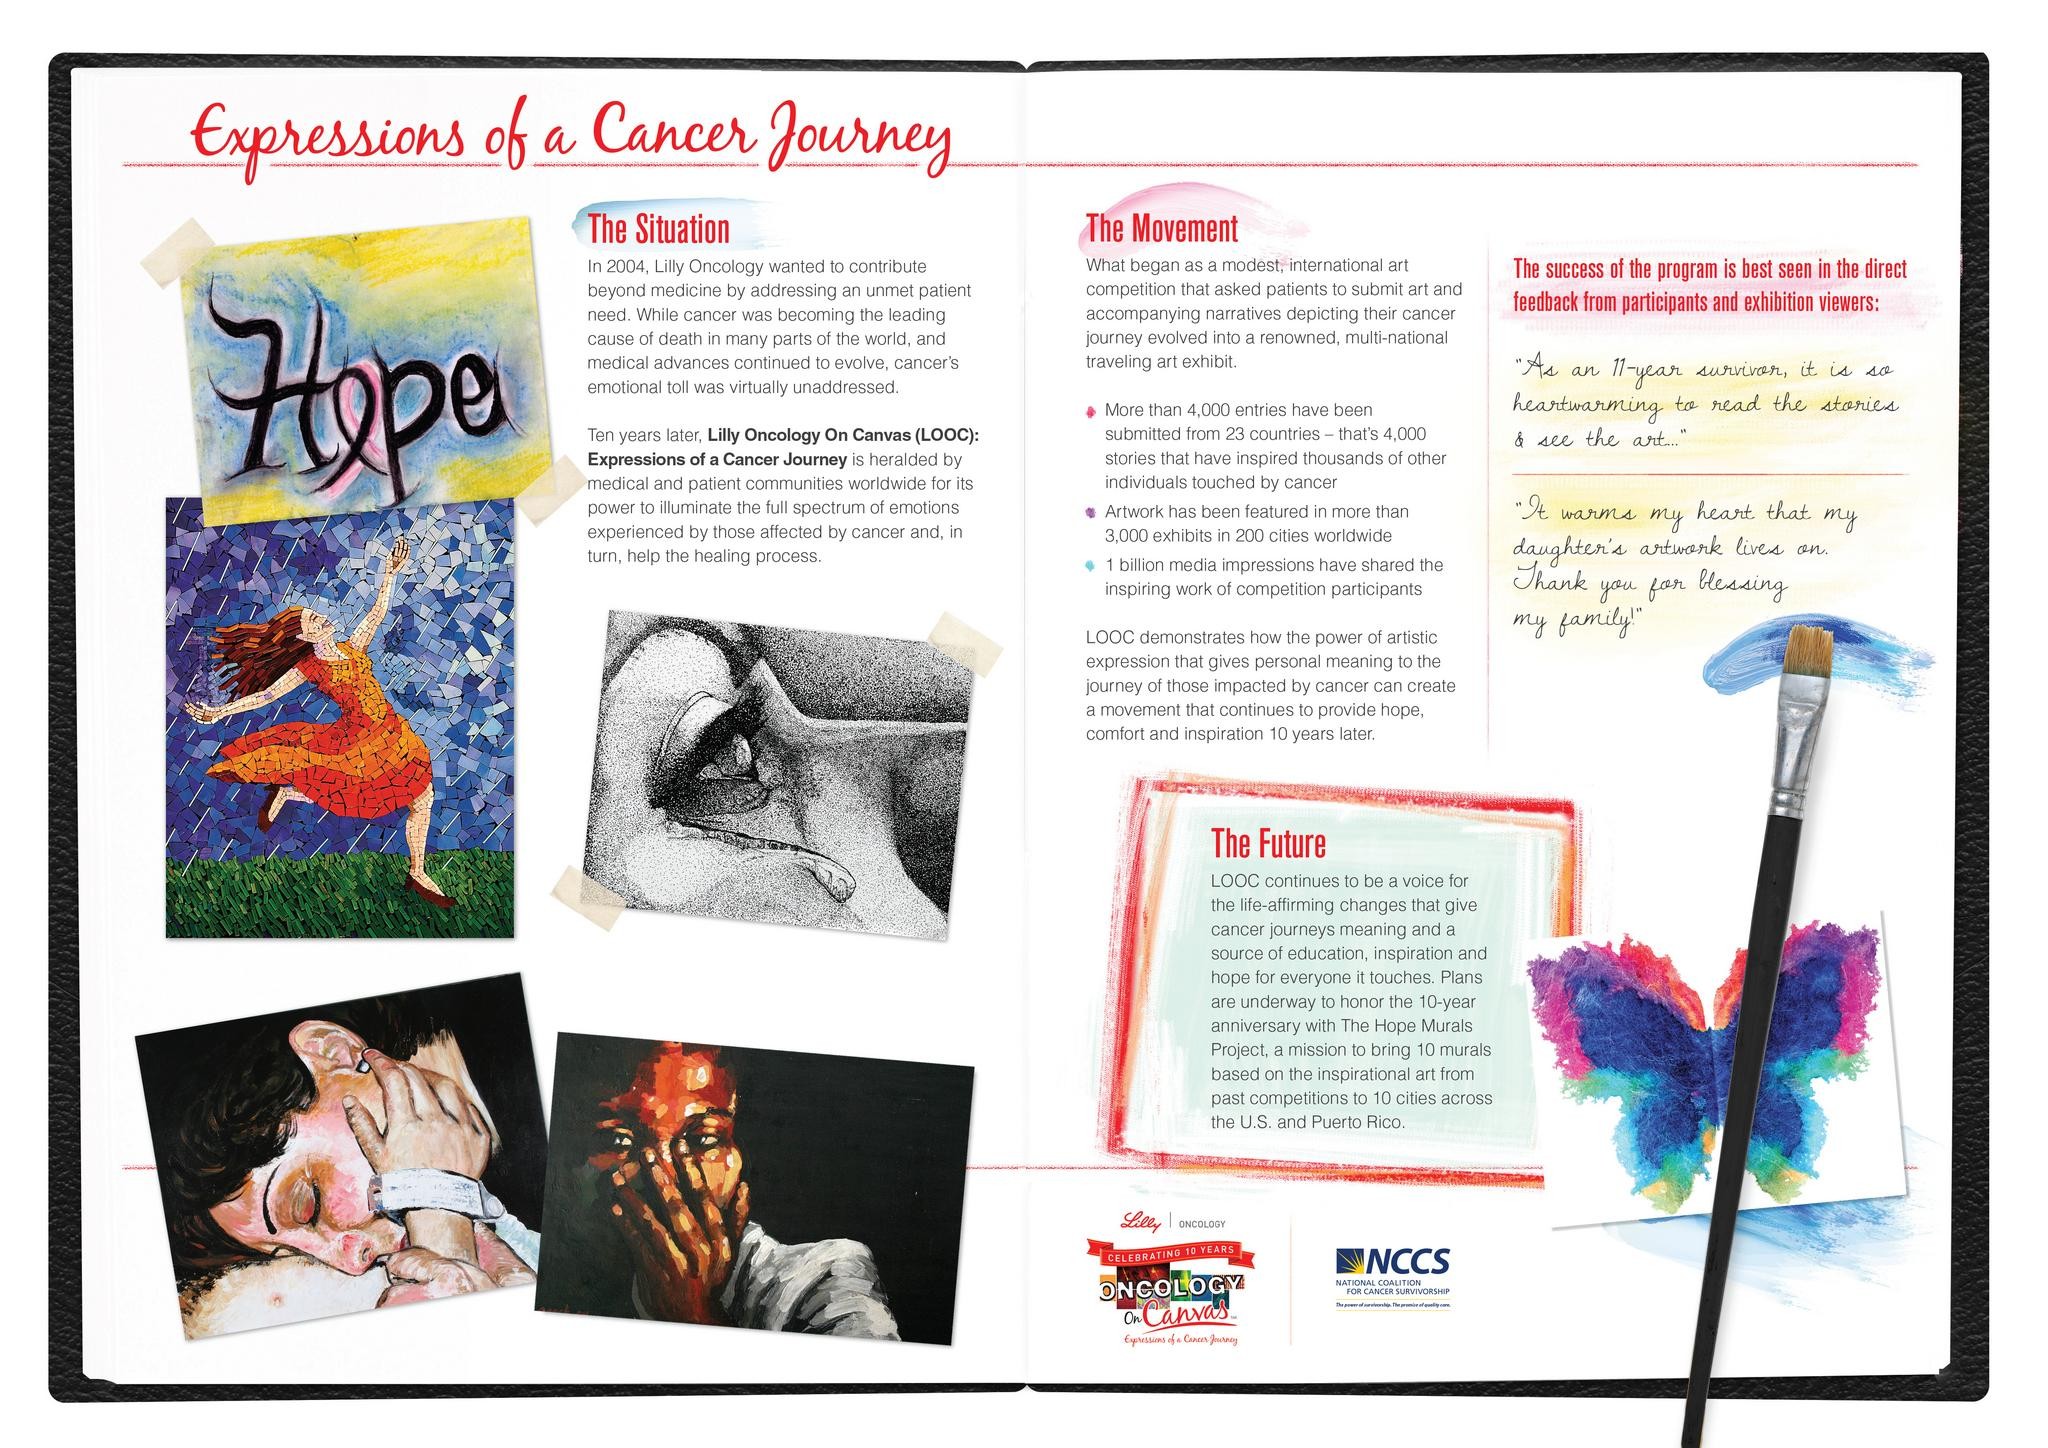 ONCOLOGY ON CANVAS: EXPRESSIONS OF A CANCER JOURNEY